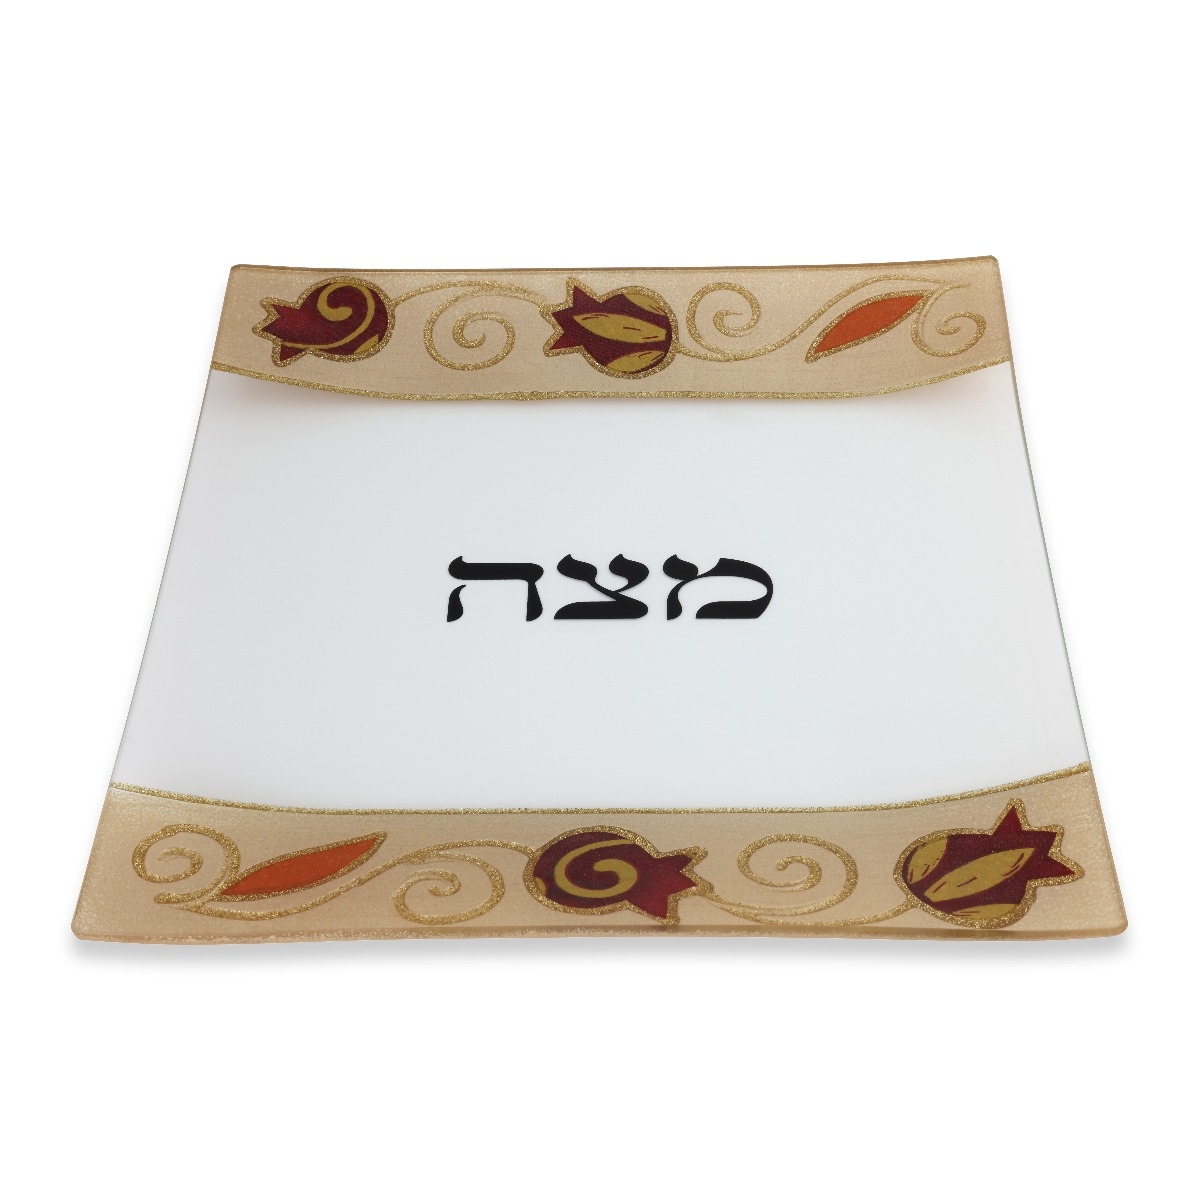 Lily Art Hand Painted Glass Matzah Plate With Red Pomegranate Design - 1